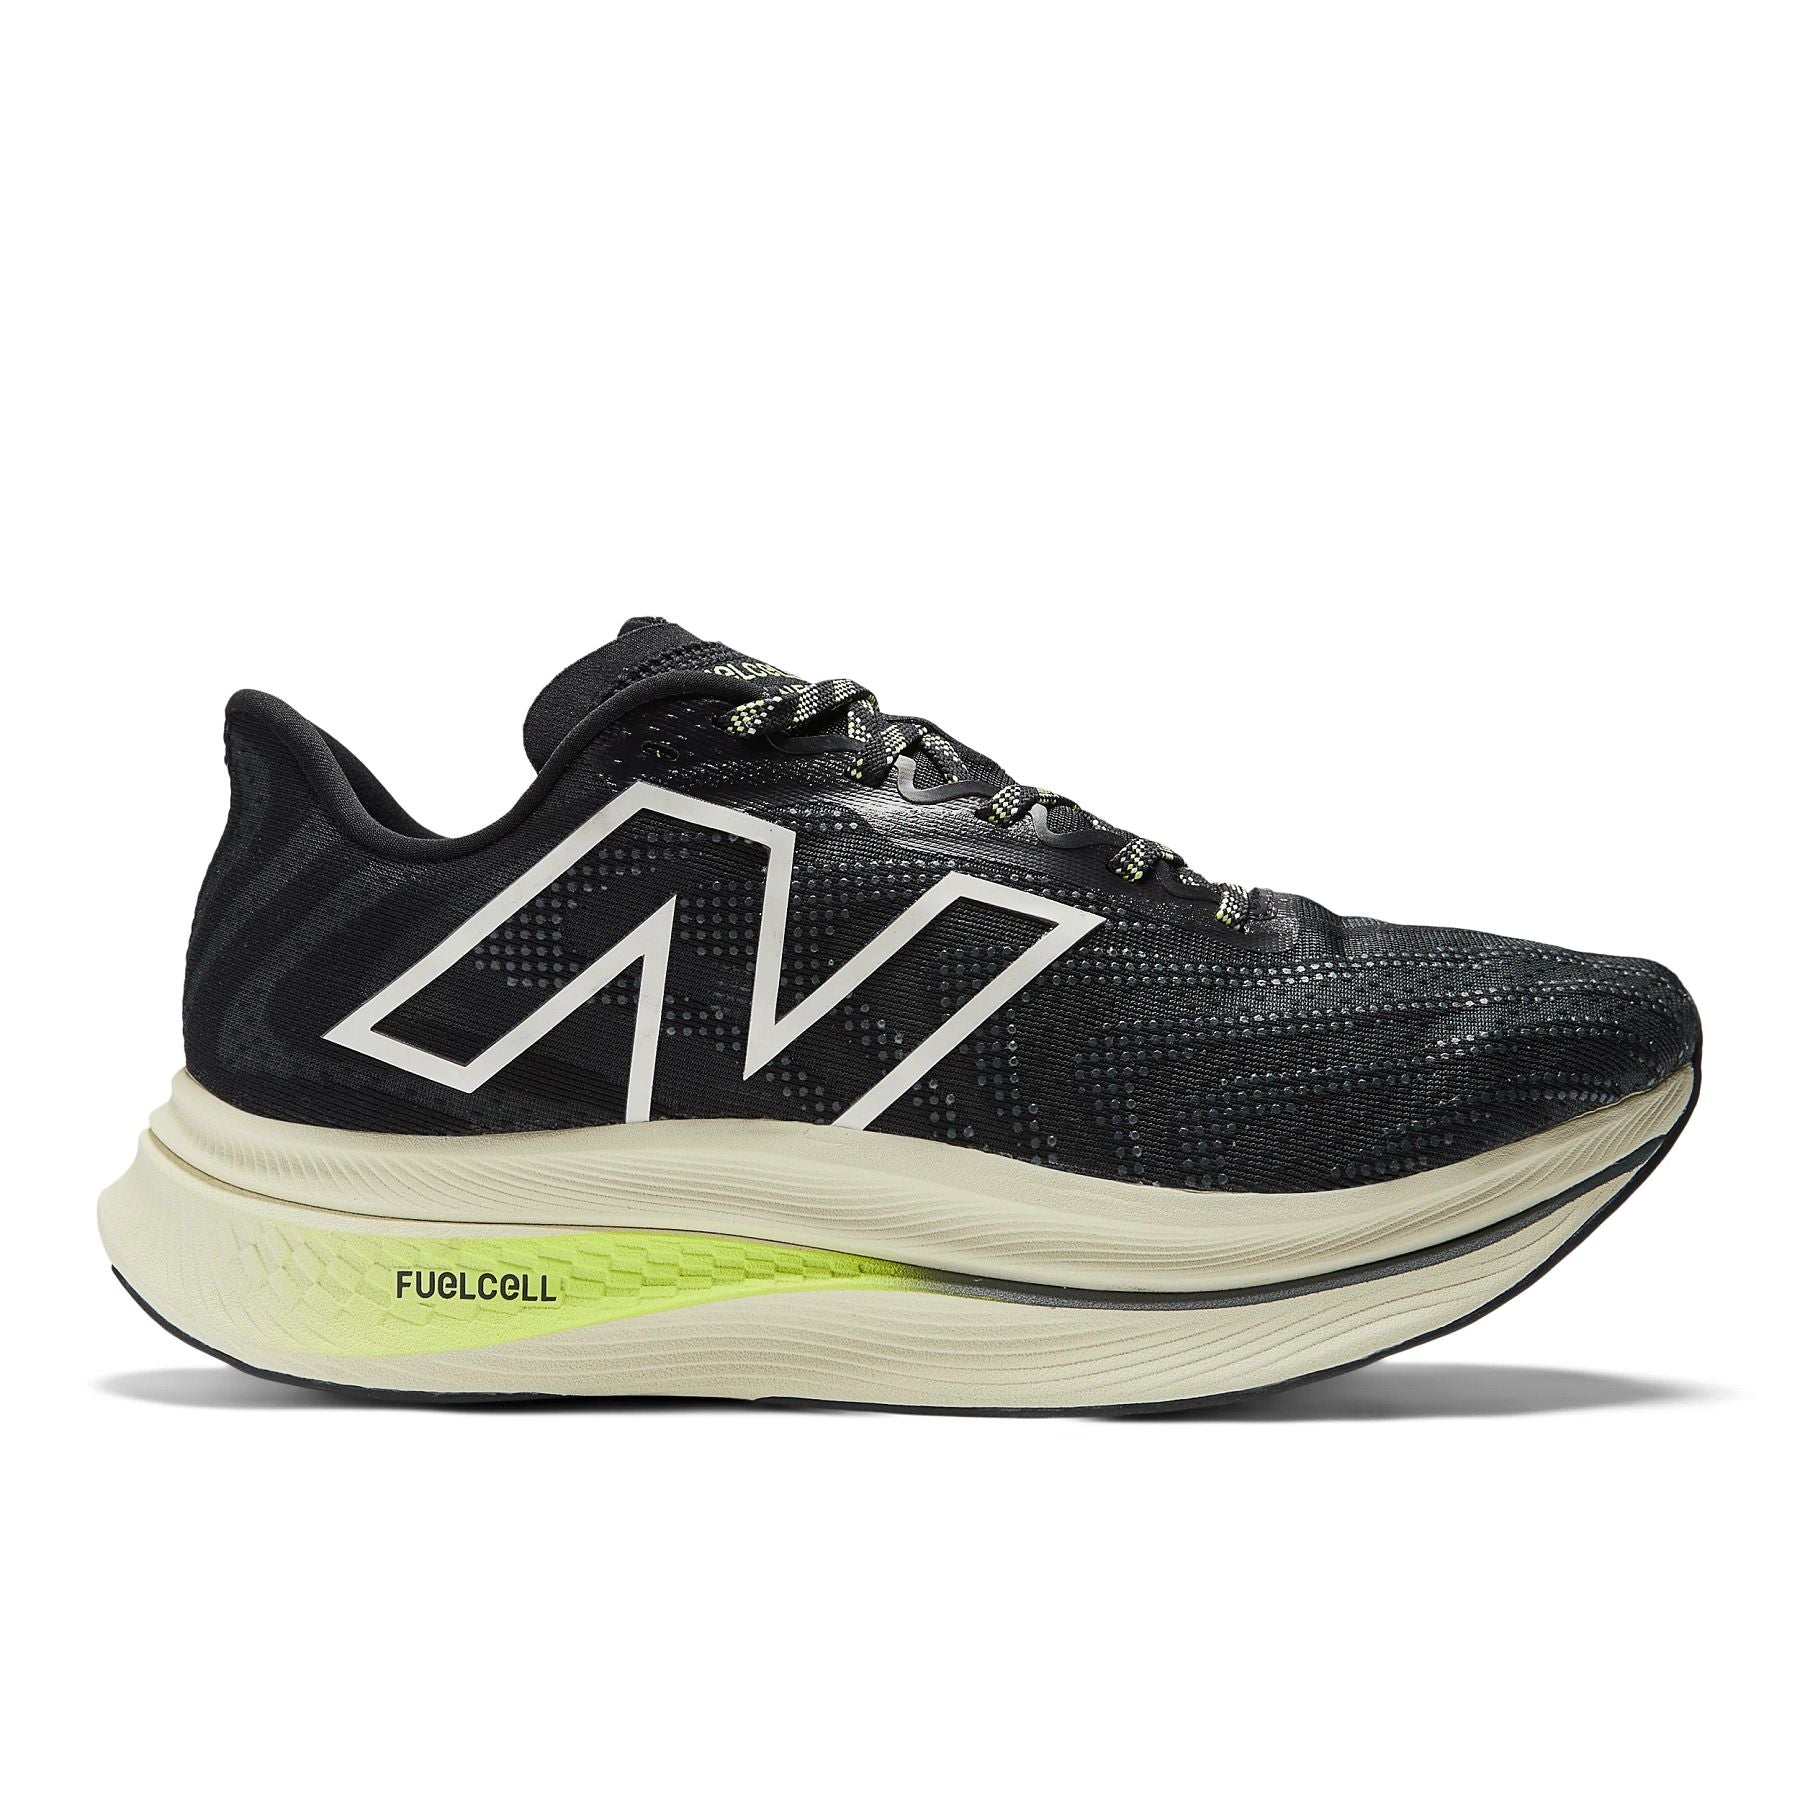 Lateral view of the Women's Fuel Cell SuperComp trainer V2 by New Balance in the color Black/Thirty Watt